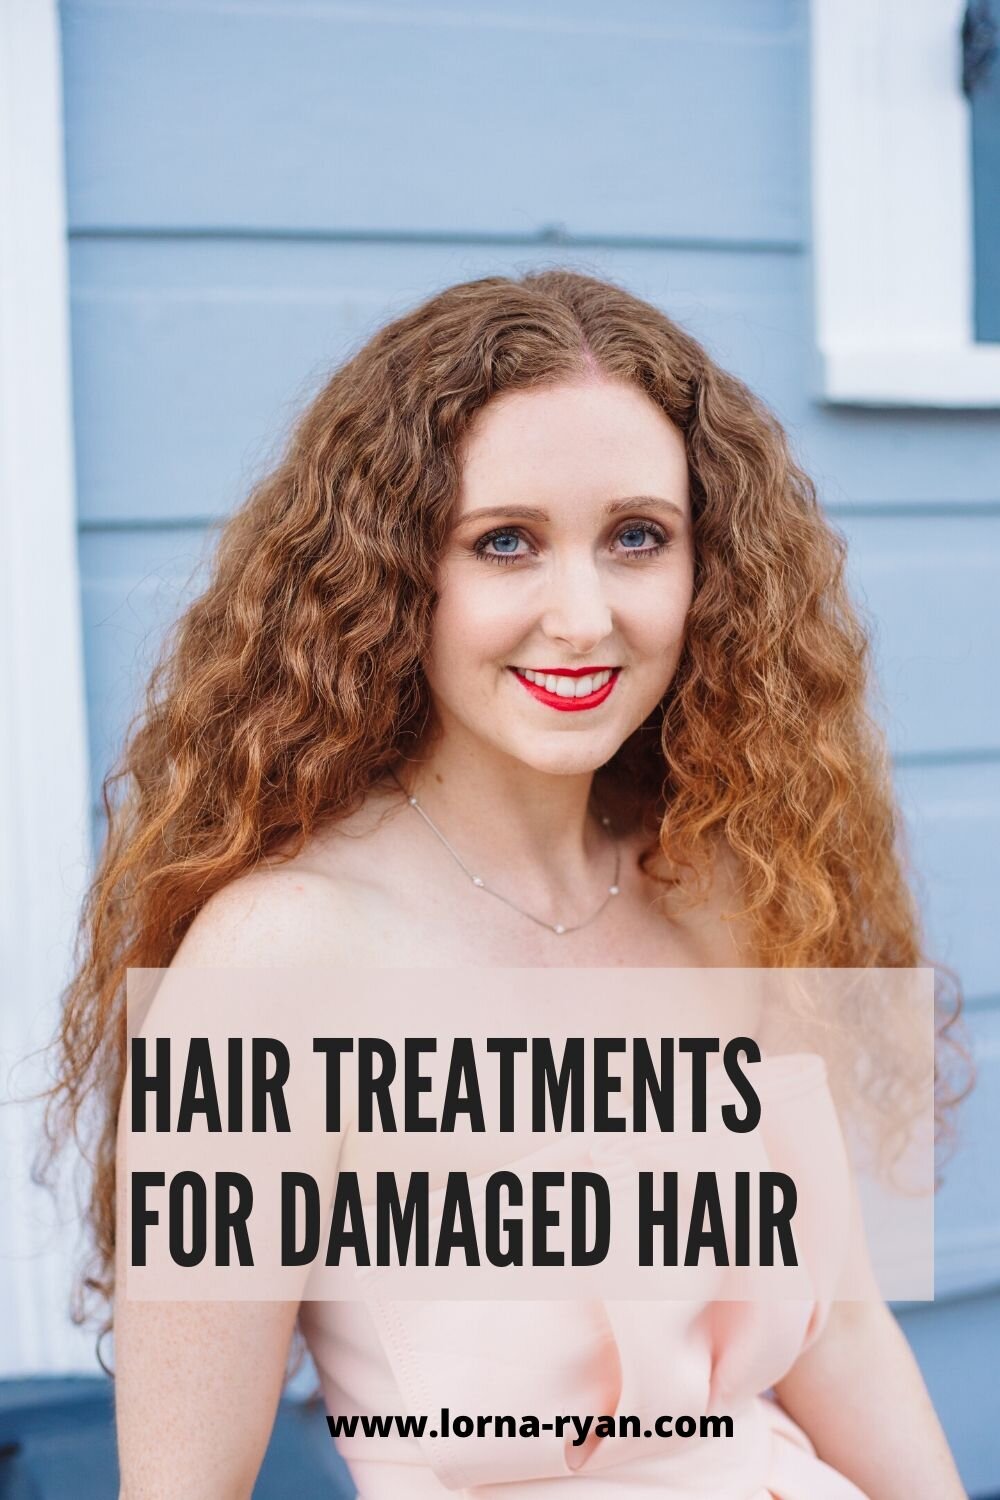 Find out the top hair treatments available at Sephora for dry and damaged hair. These are at-home hair treatments that are fast and easy to use on a weekly basis. Some are just 1 minute! Your hair will be healthy, shiny and repaired after using thes…